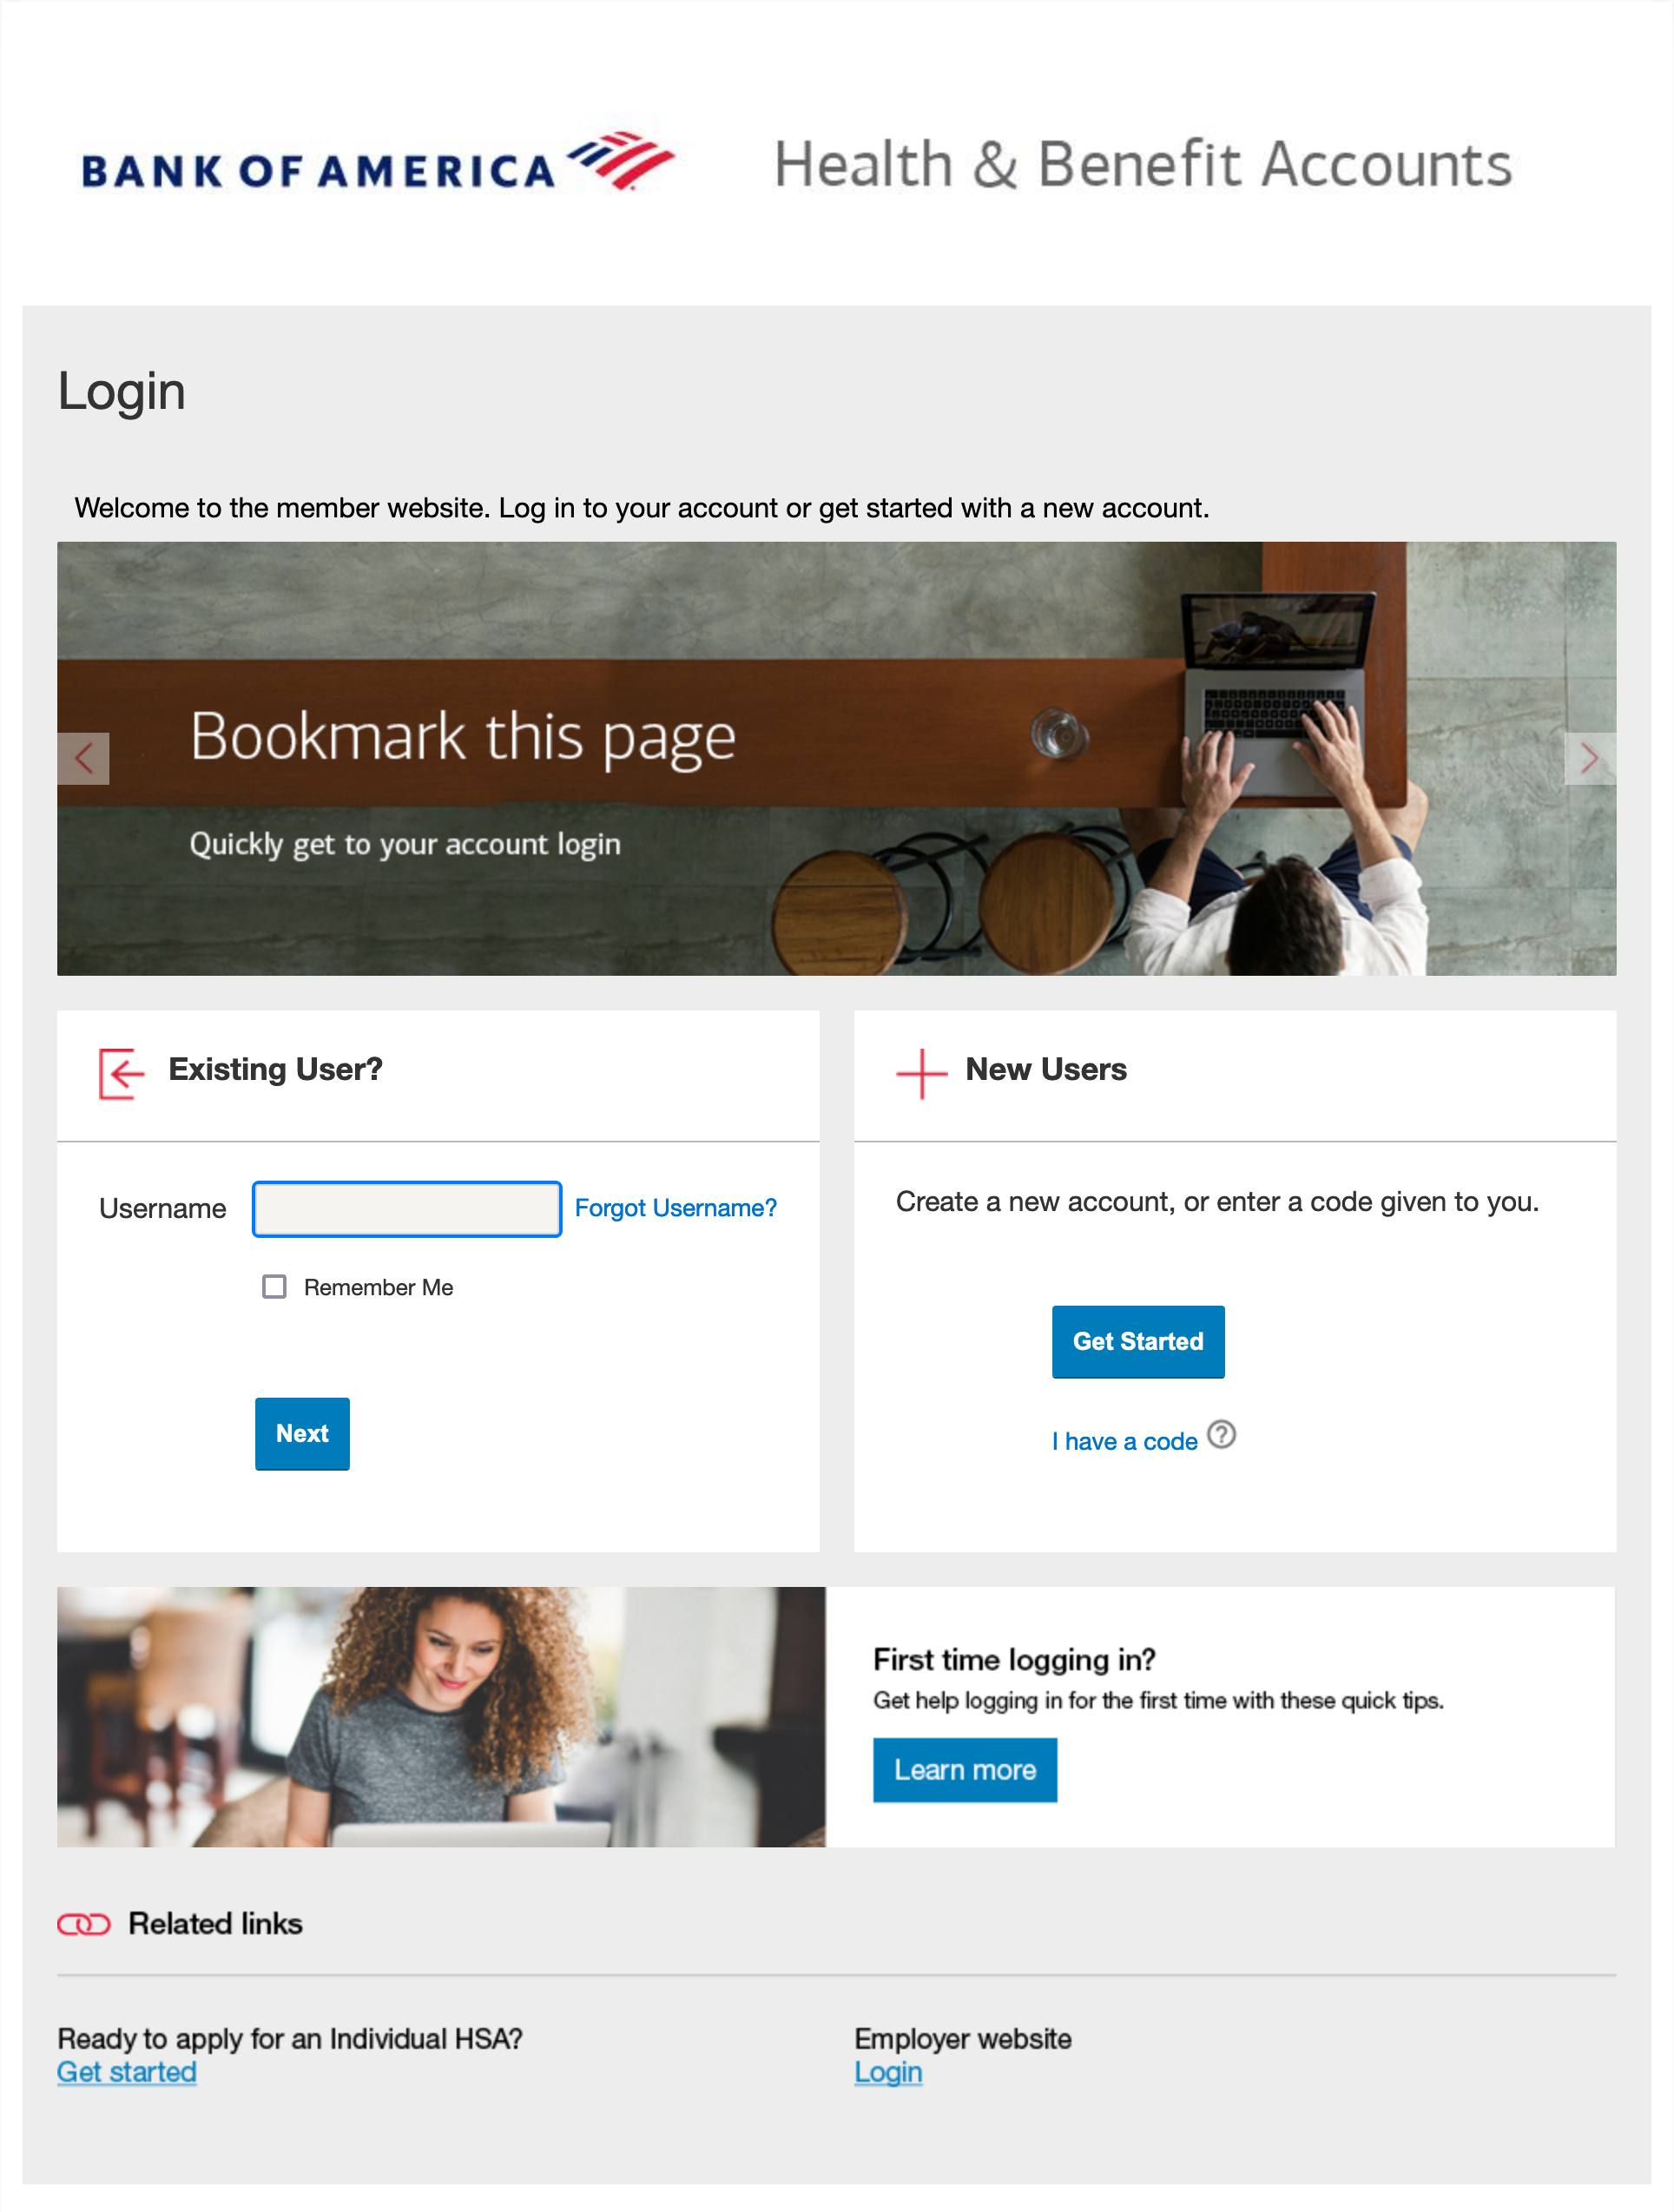 This image shows the desktop view of the member website login page. The page shows the option to log in as an existing user, and the option to use the new user portal where you can create a new account or enter a code given to you.